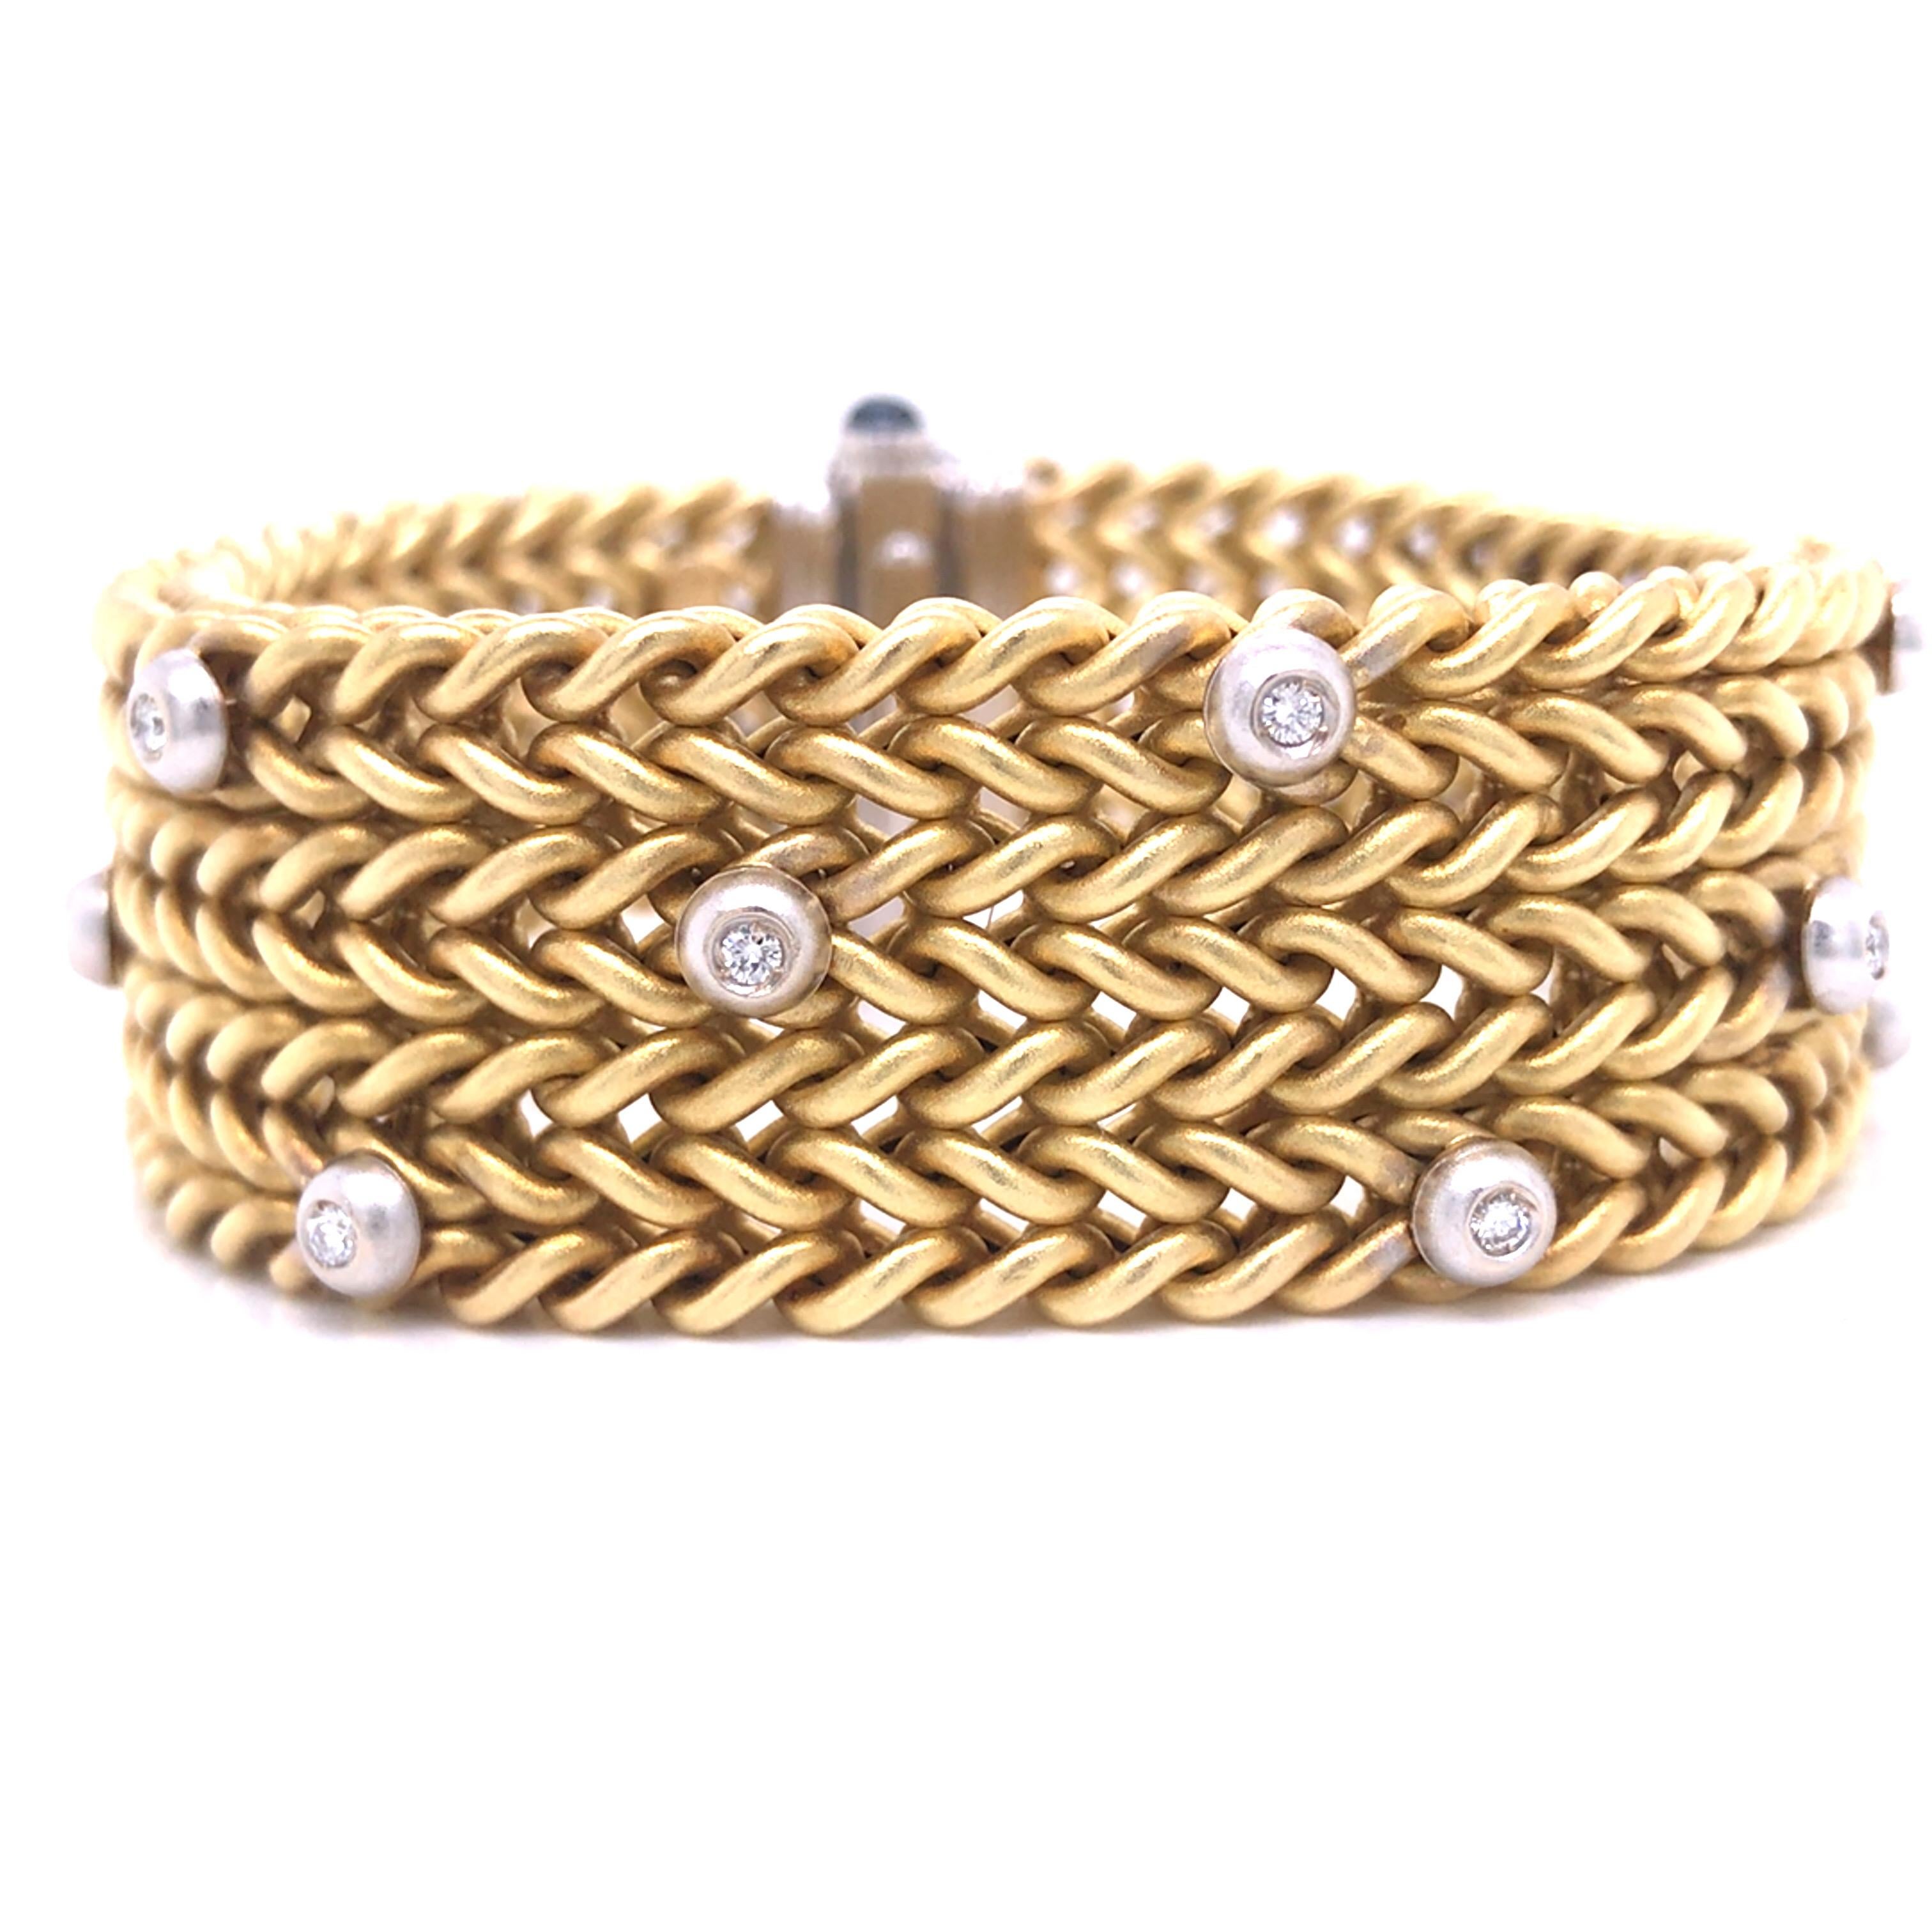 Diamond Sapphire Woven Bracelet in 18K Two-Tone Gold.  (2) Sapphires weighing 0.50 carats and Round Brilliant Cut Diamonds weighing 0.80 carat total weight, G-H iin color VS-SI in clarity.  The Bracelet measures 7 3/4 inch in length and 1 1/8 inch